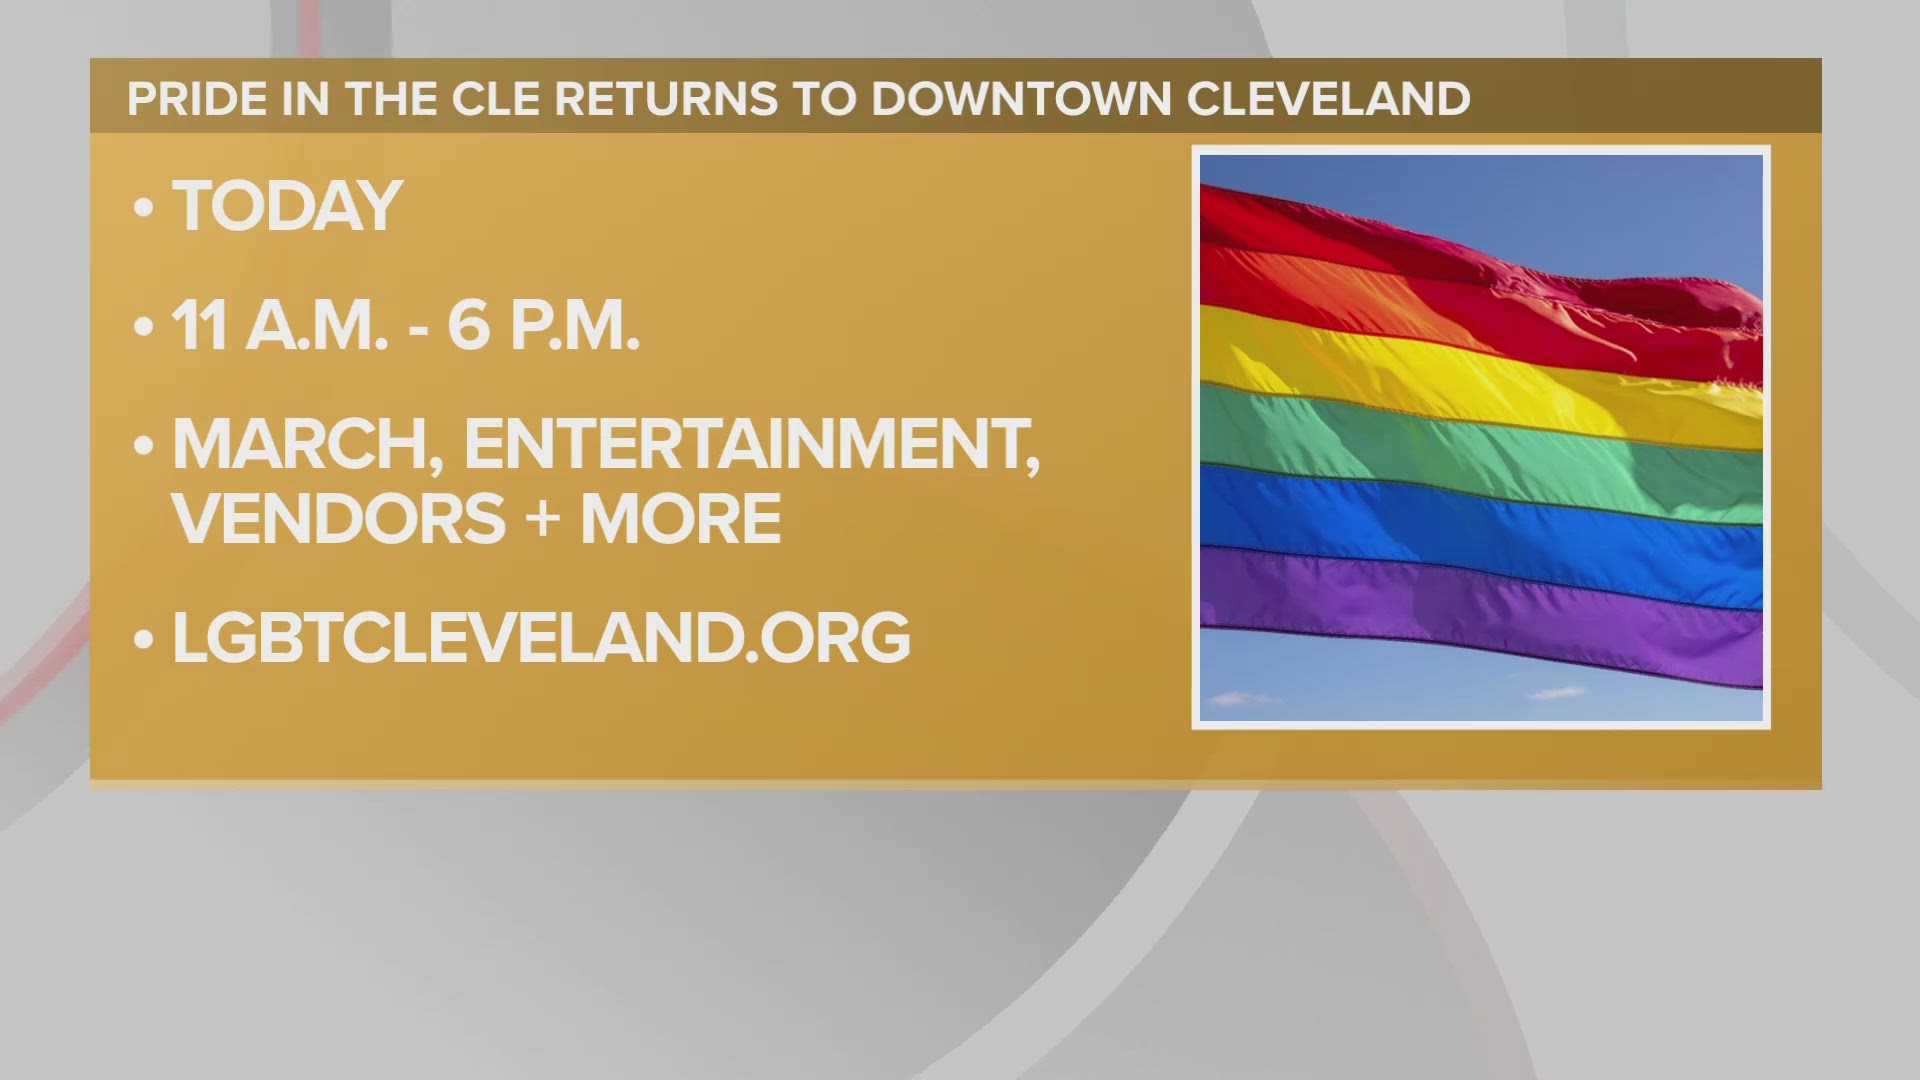 Pride in the CLE is taking place from 11 a.m. to 6 p.m. on Saturday, June 3